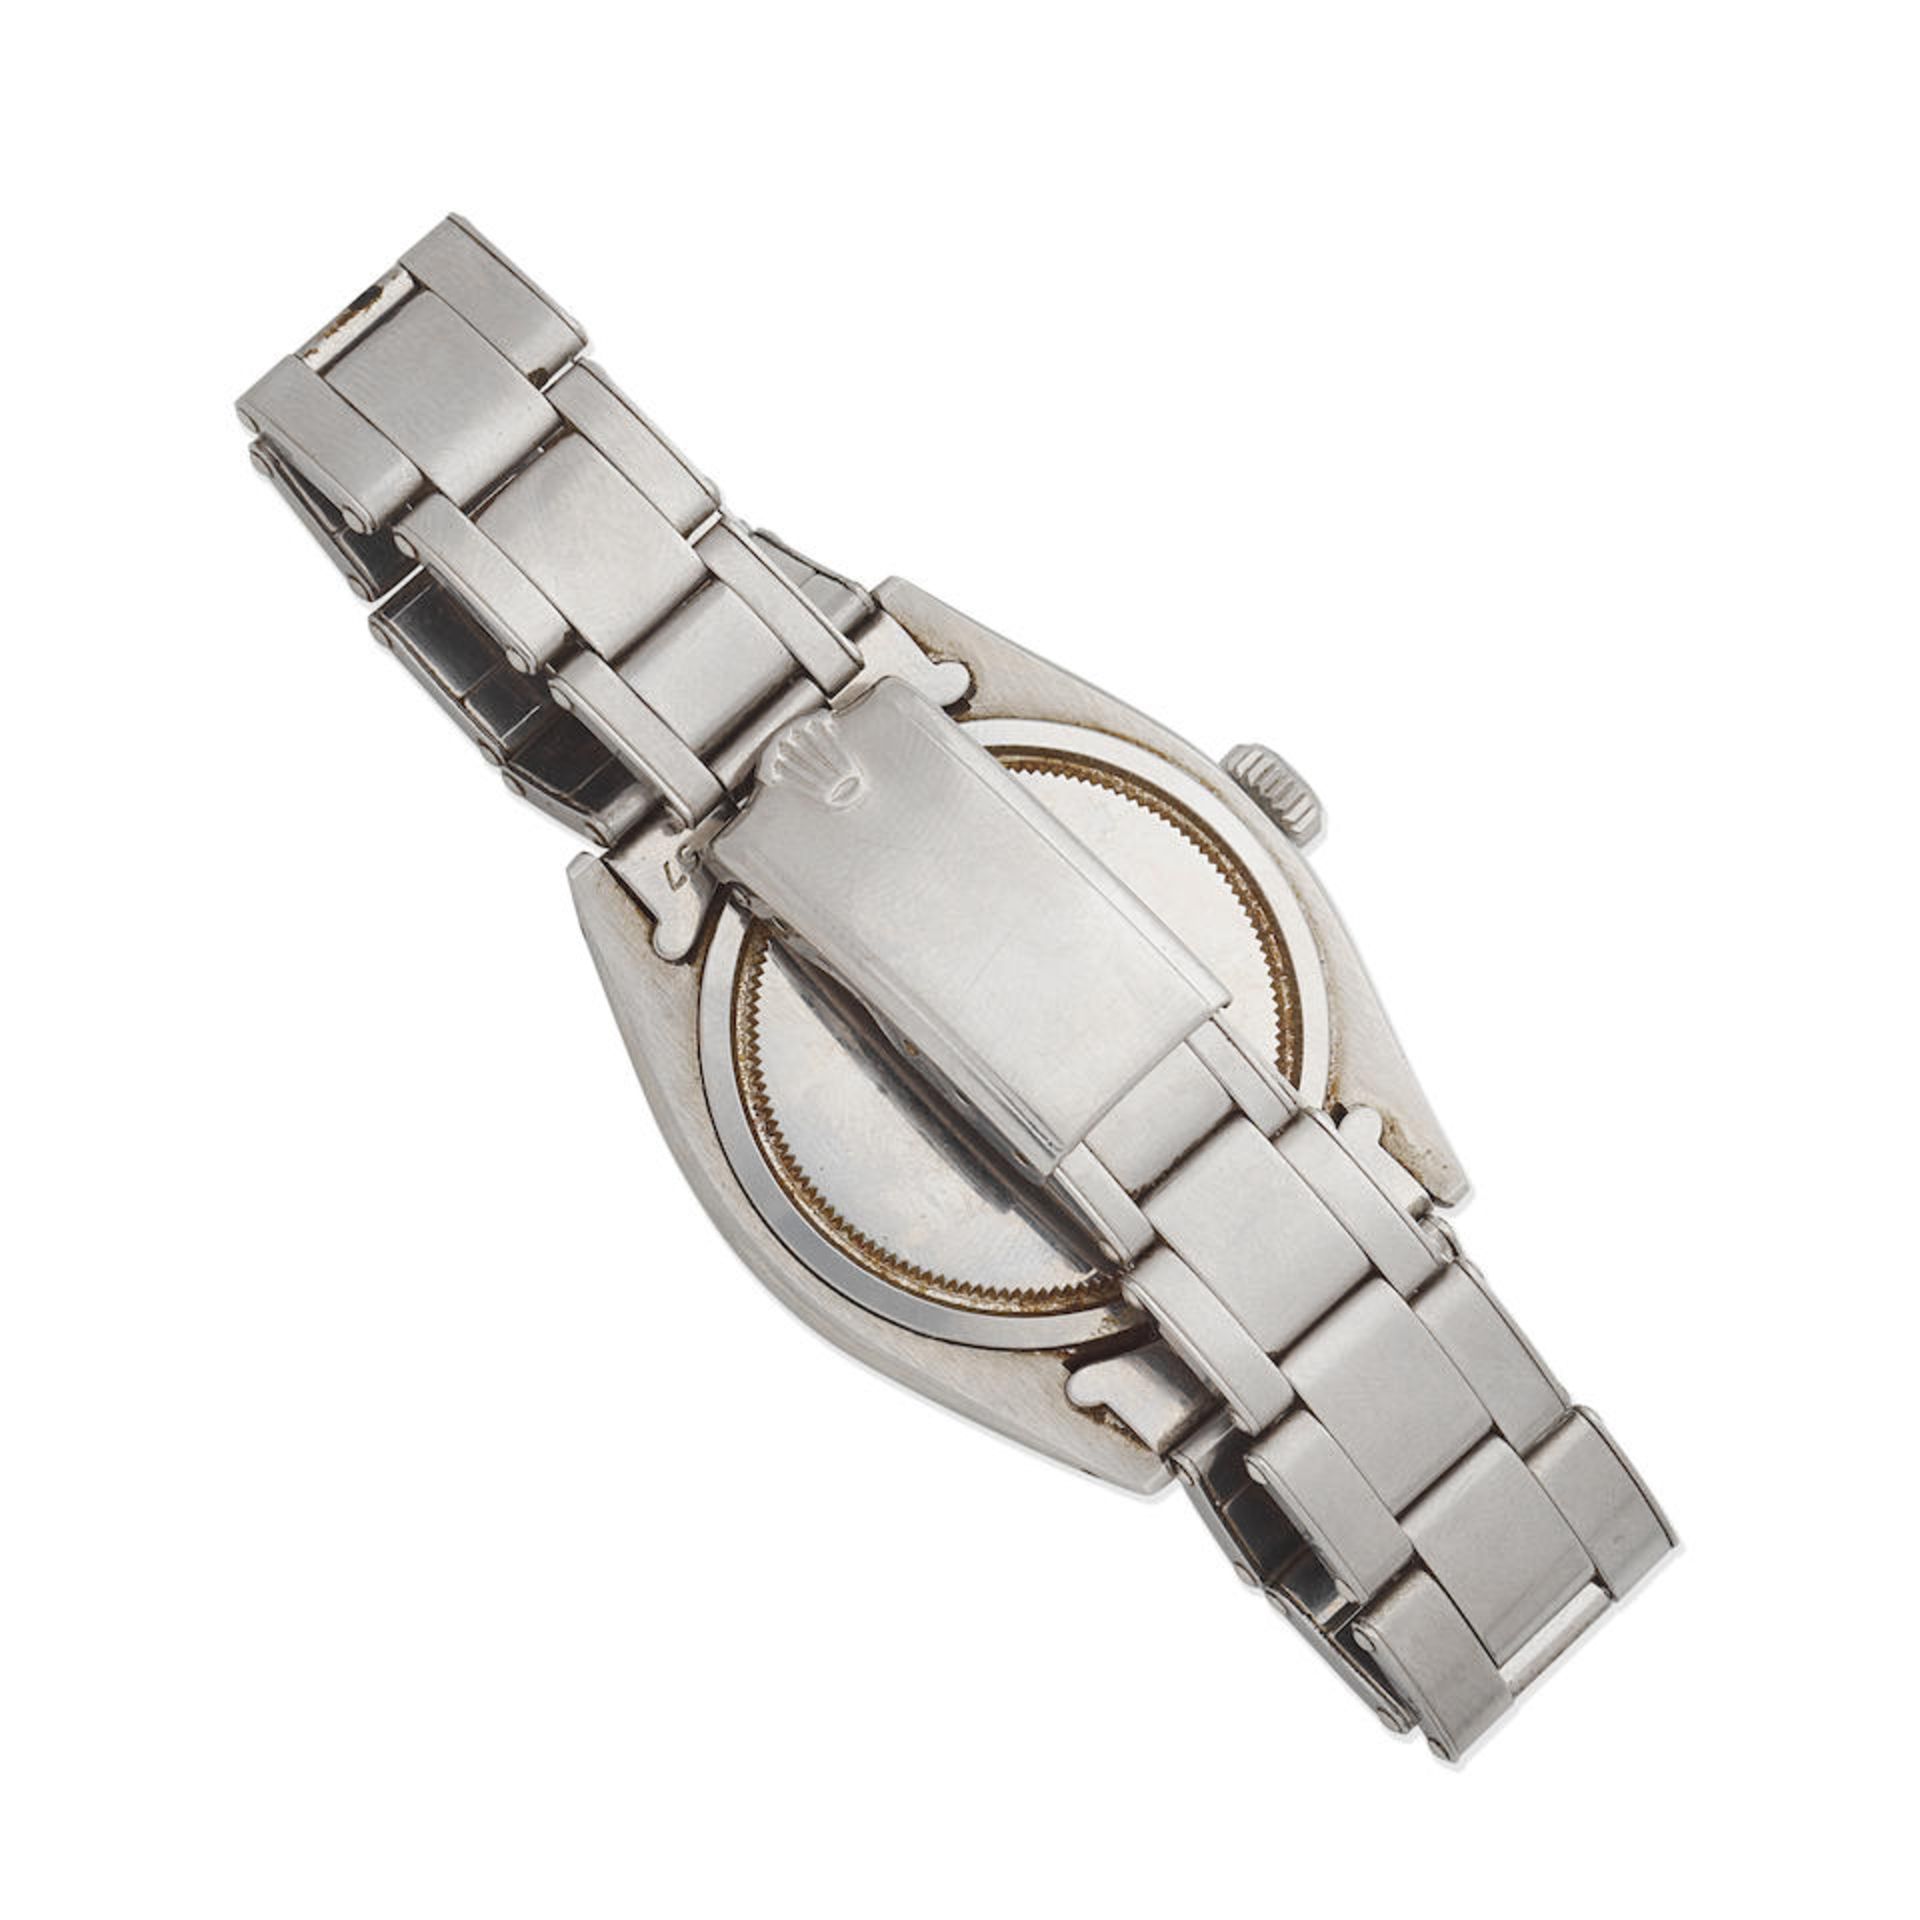 Rolex. A stainless steel manual wind bracelet watch Oyster Royal, Ref: 6426/6427, Circa 1961 - Image 3 of 5